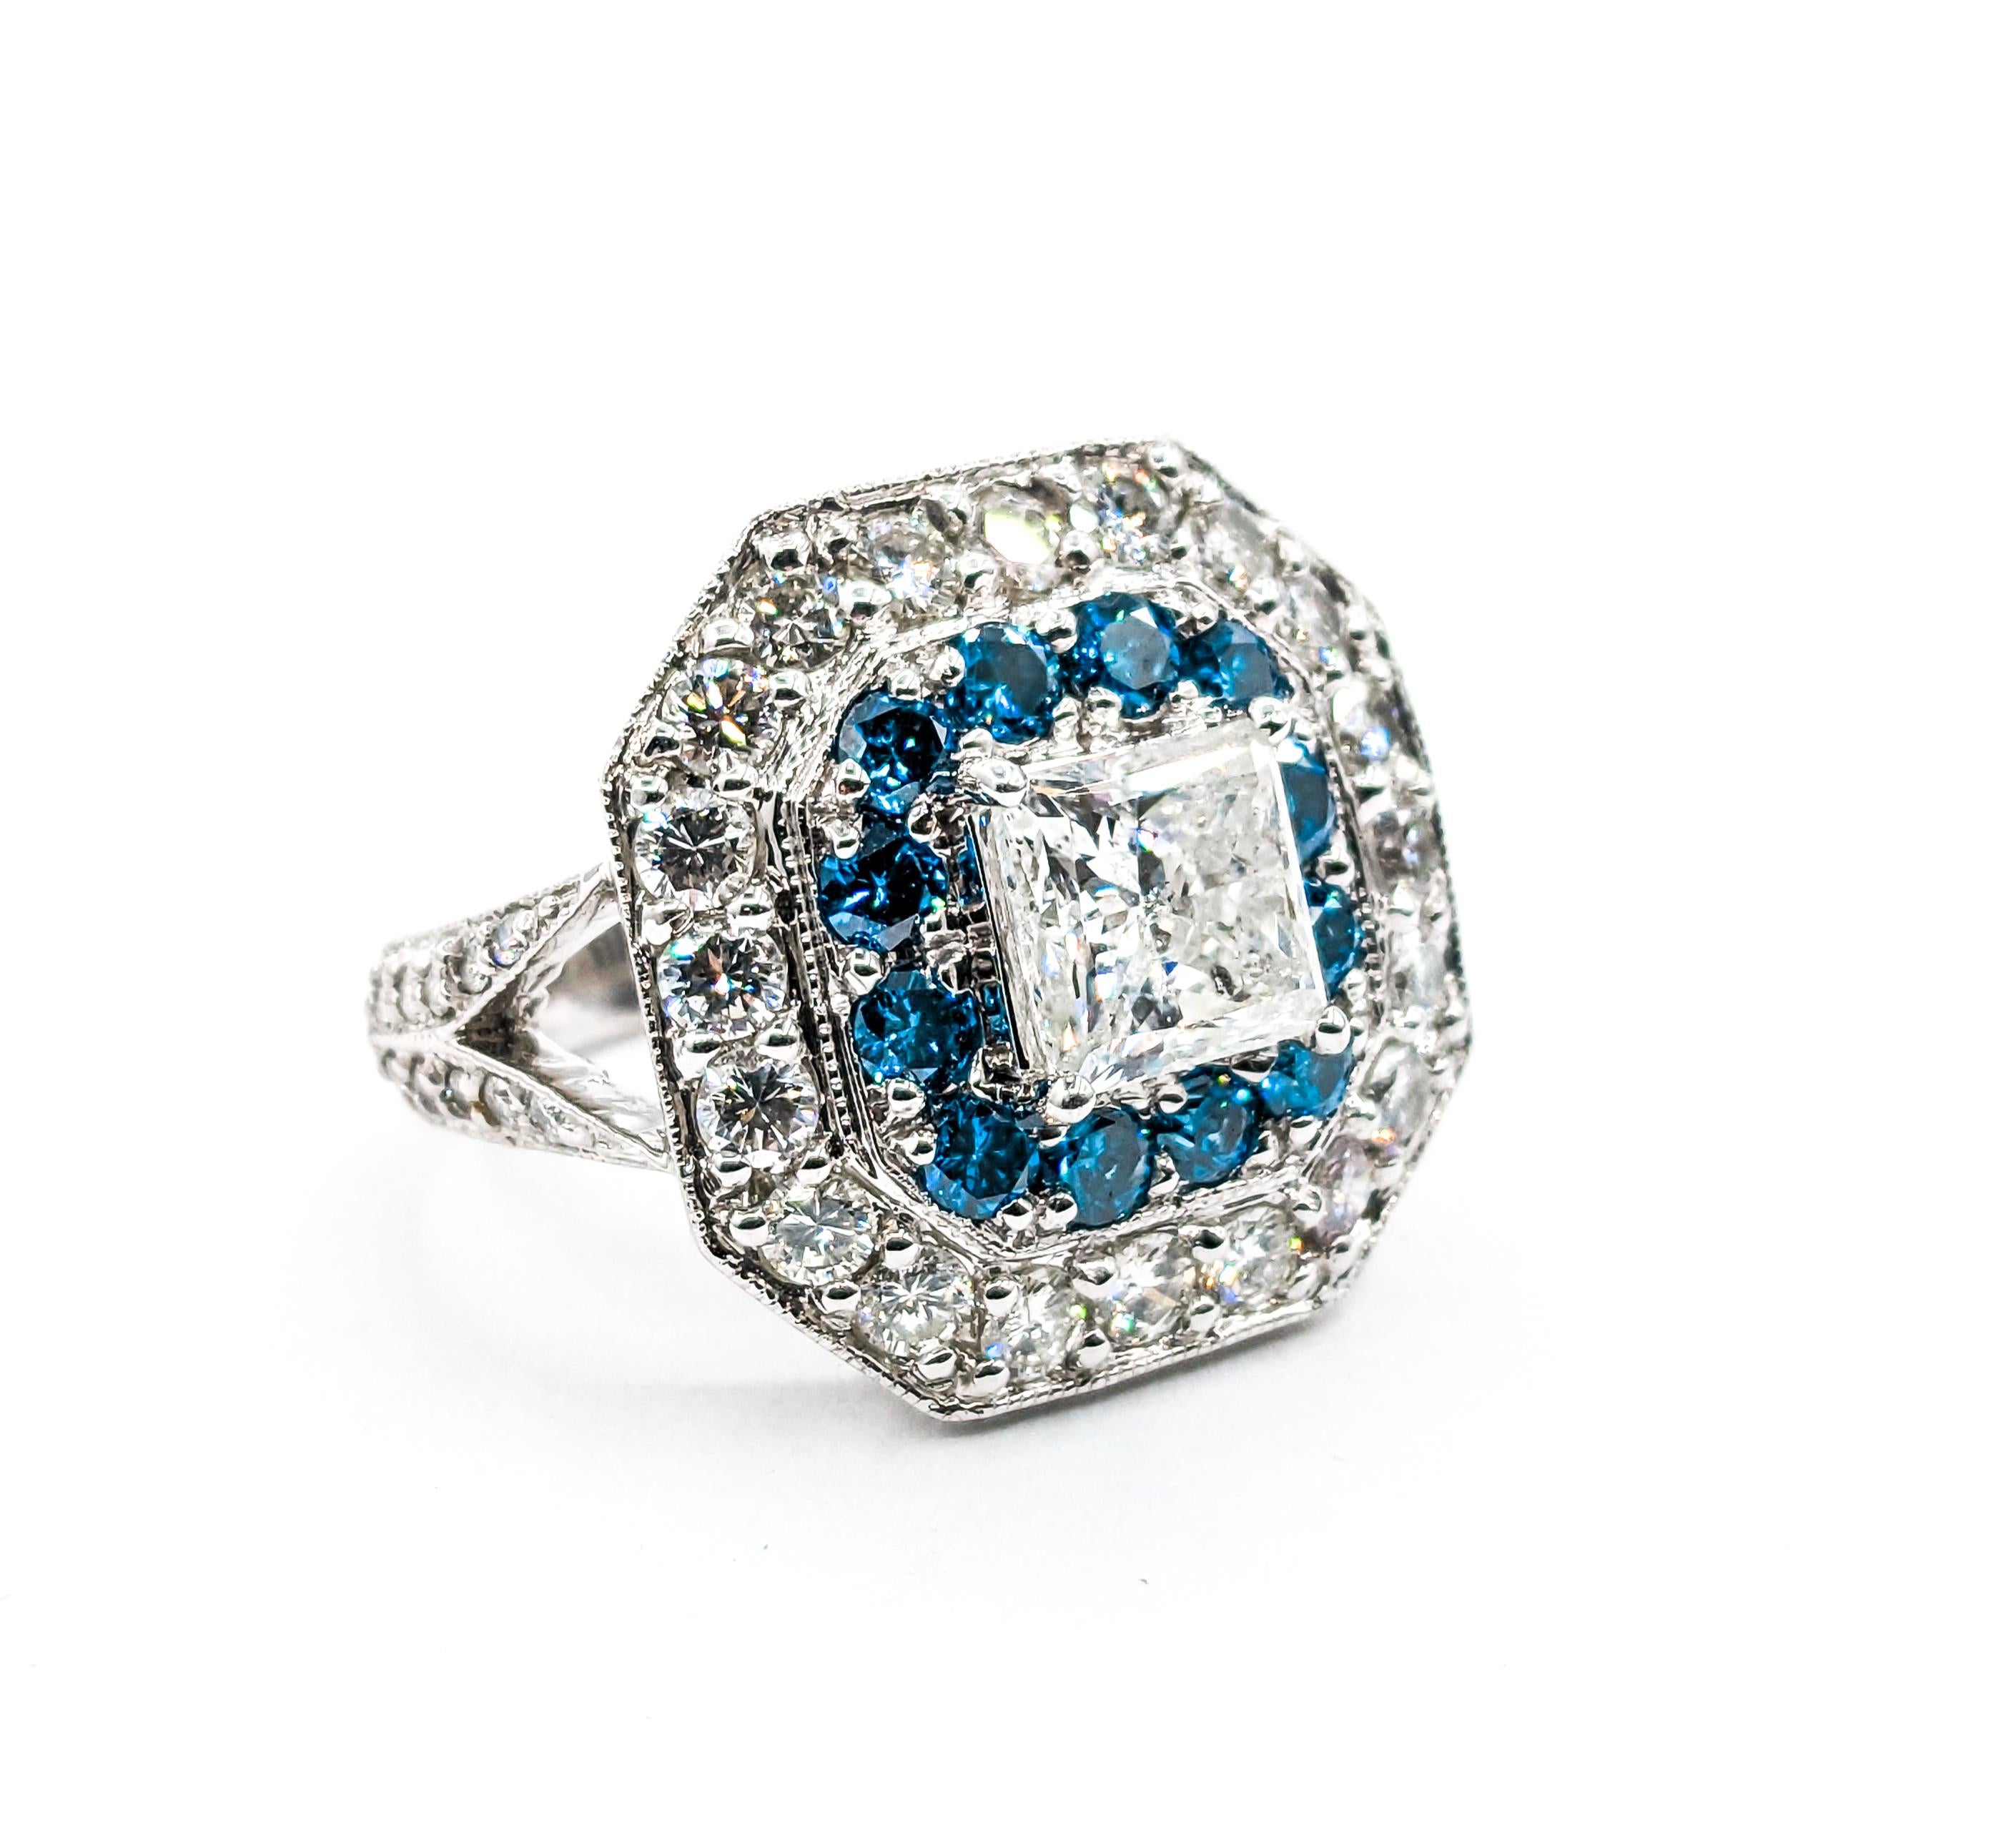 Superb White and Blue Diamond Statement Ring For Sale 1